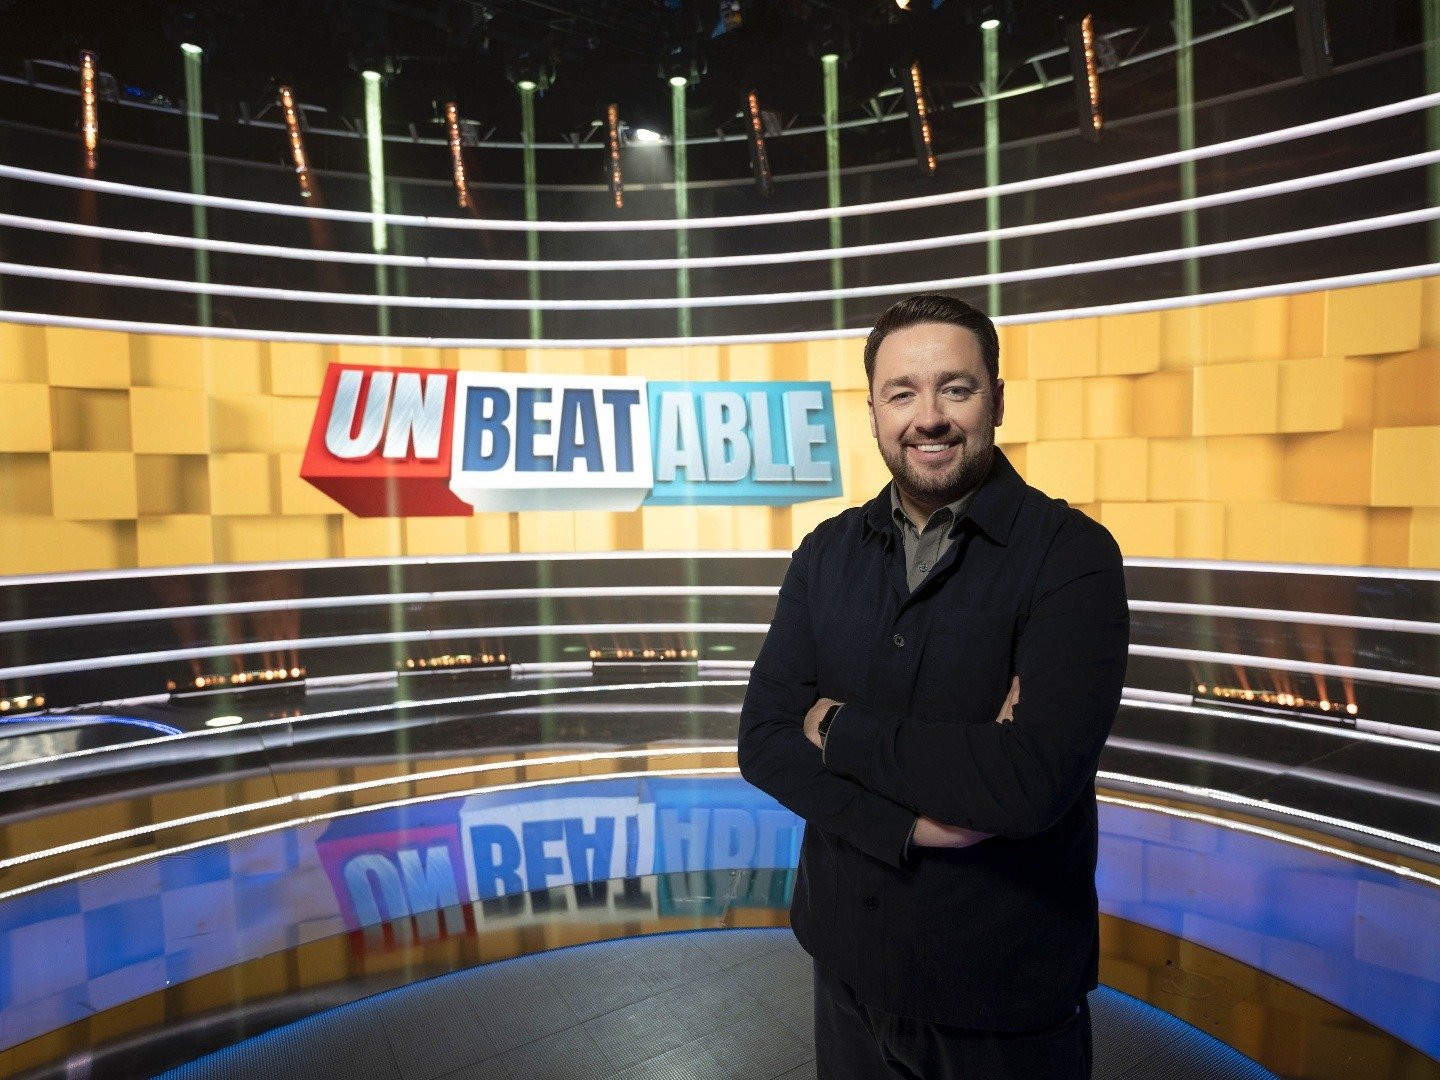 Unbeatable on TV Series 1 Episode 19 Channels and